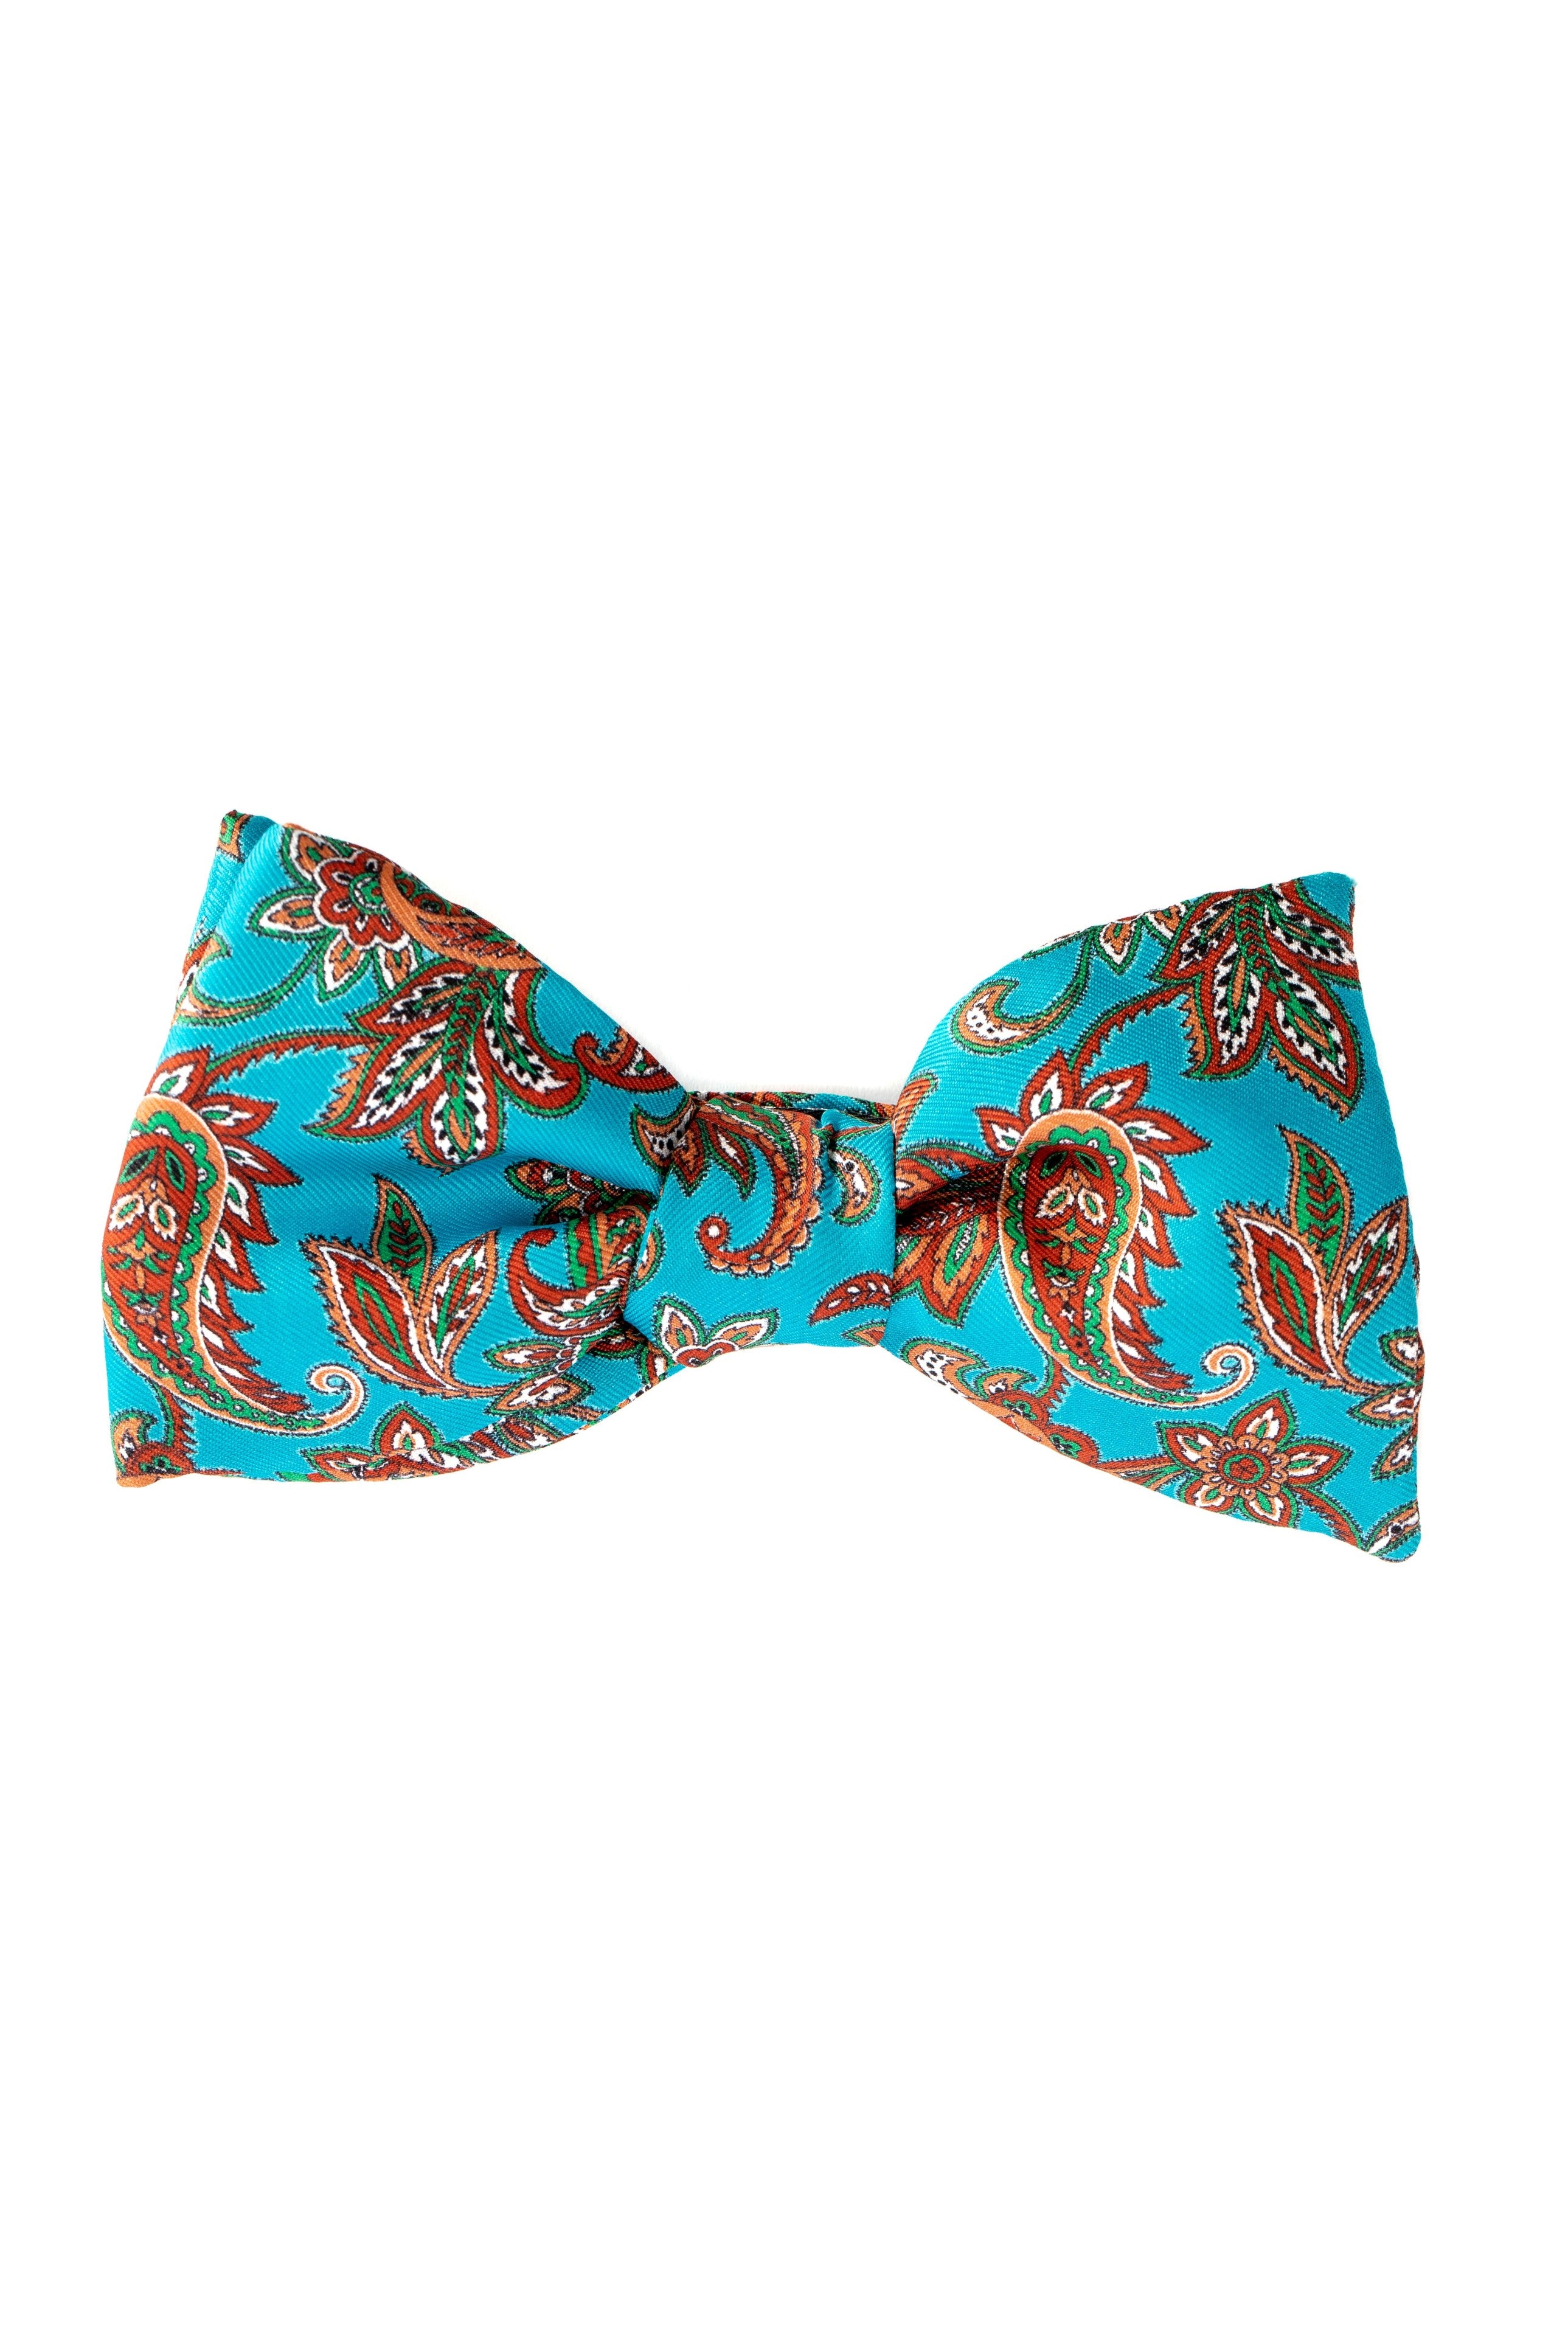 Turquoise Paisley Pattern Bow Tie